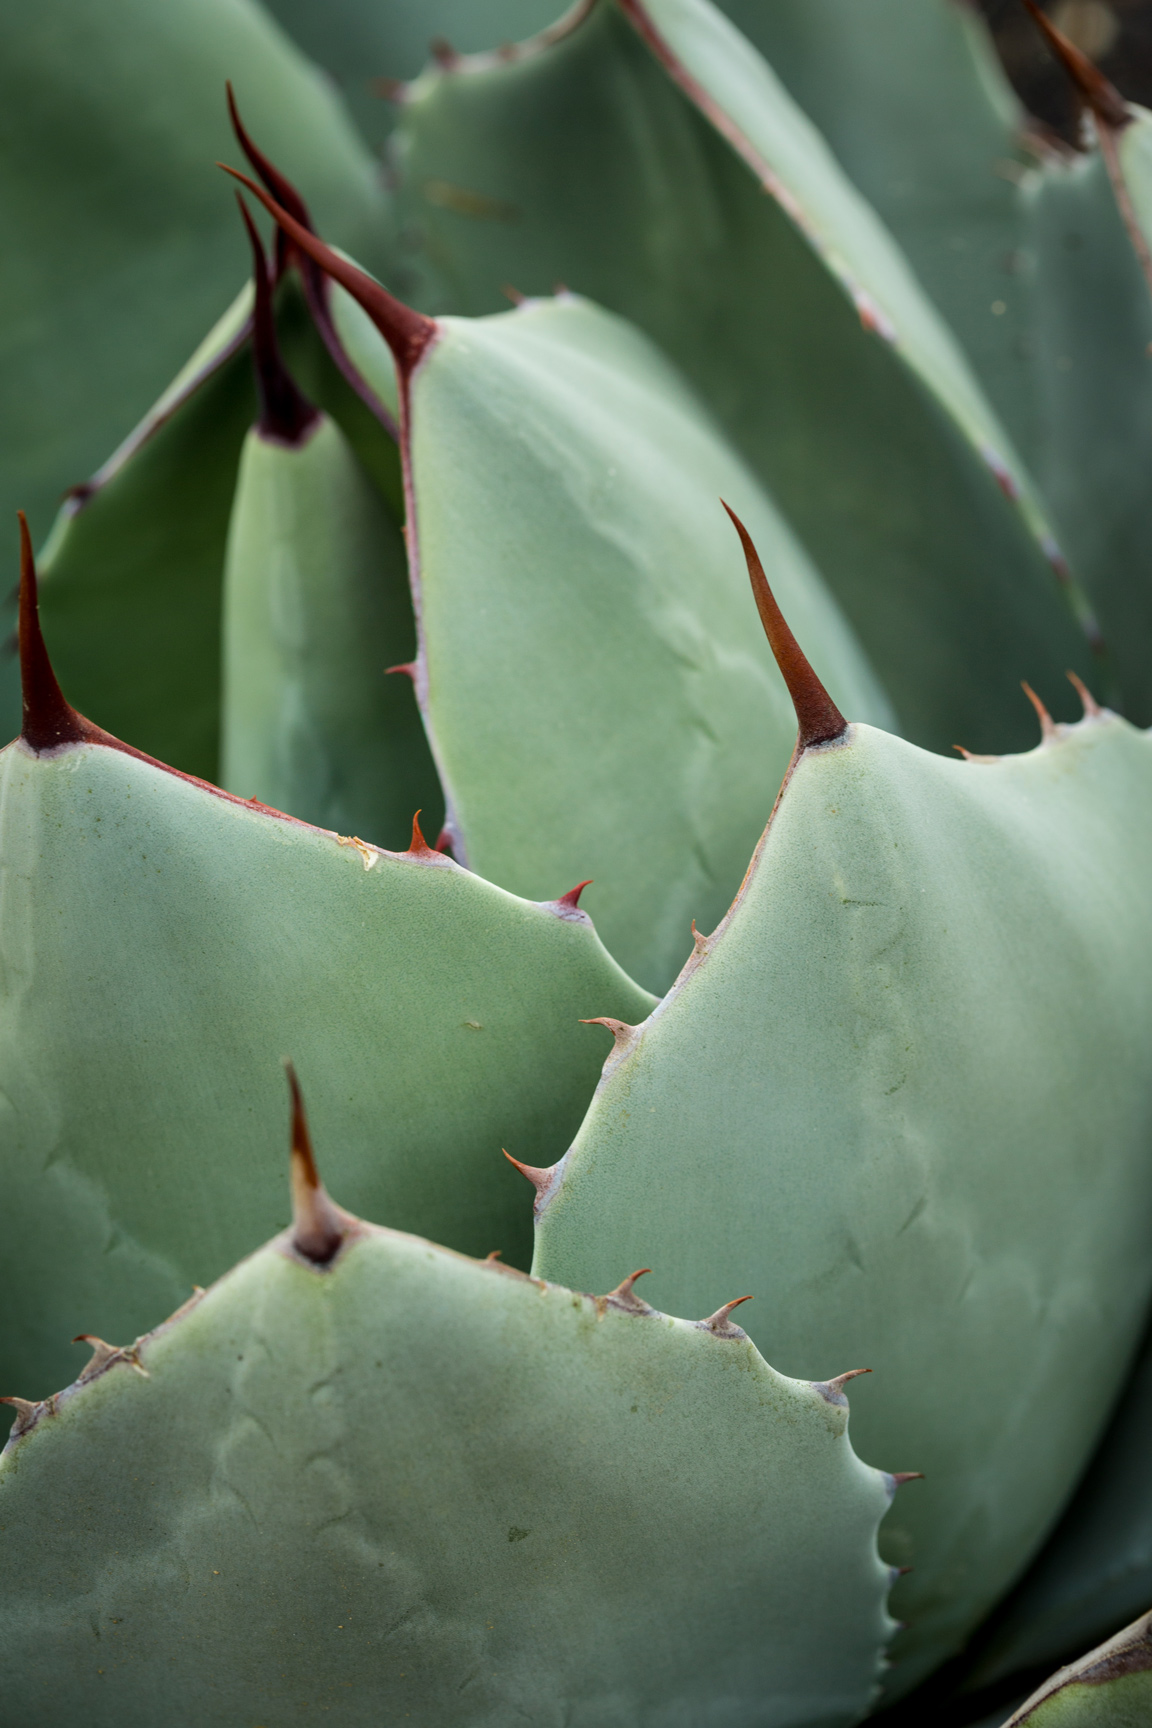 A close-up of the leaves and spines of the Artichoke Agave.